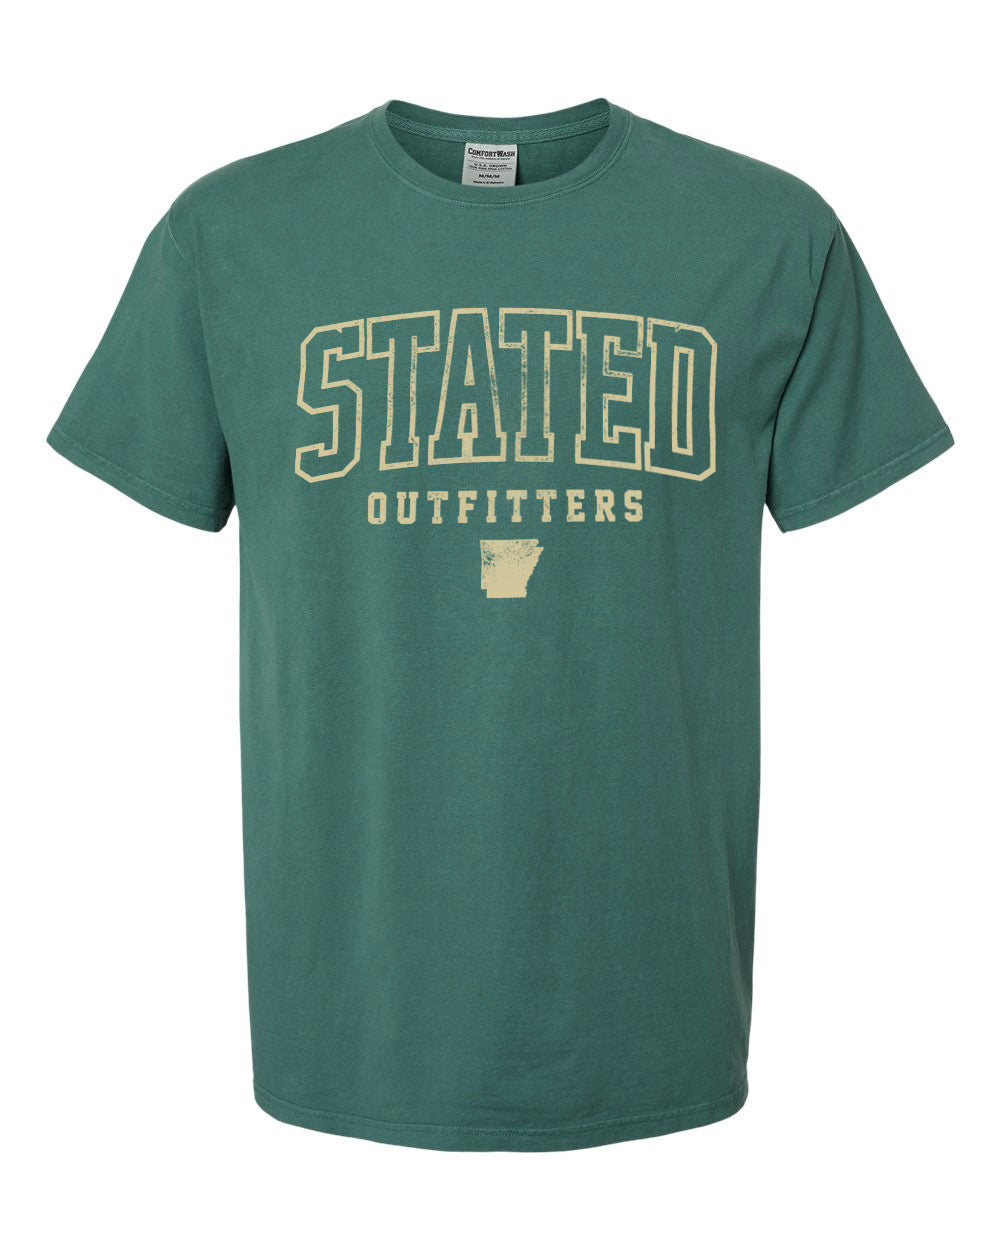 Stated Outfitters Arch T-Shirt